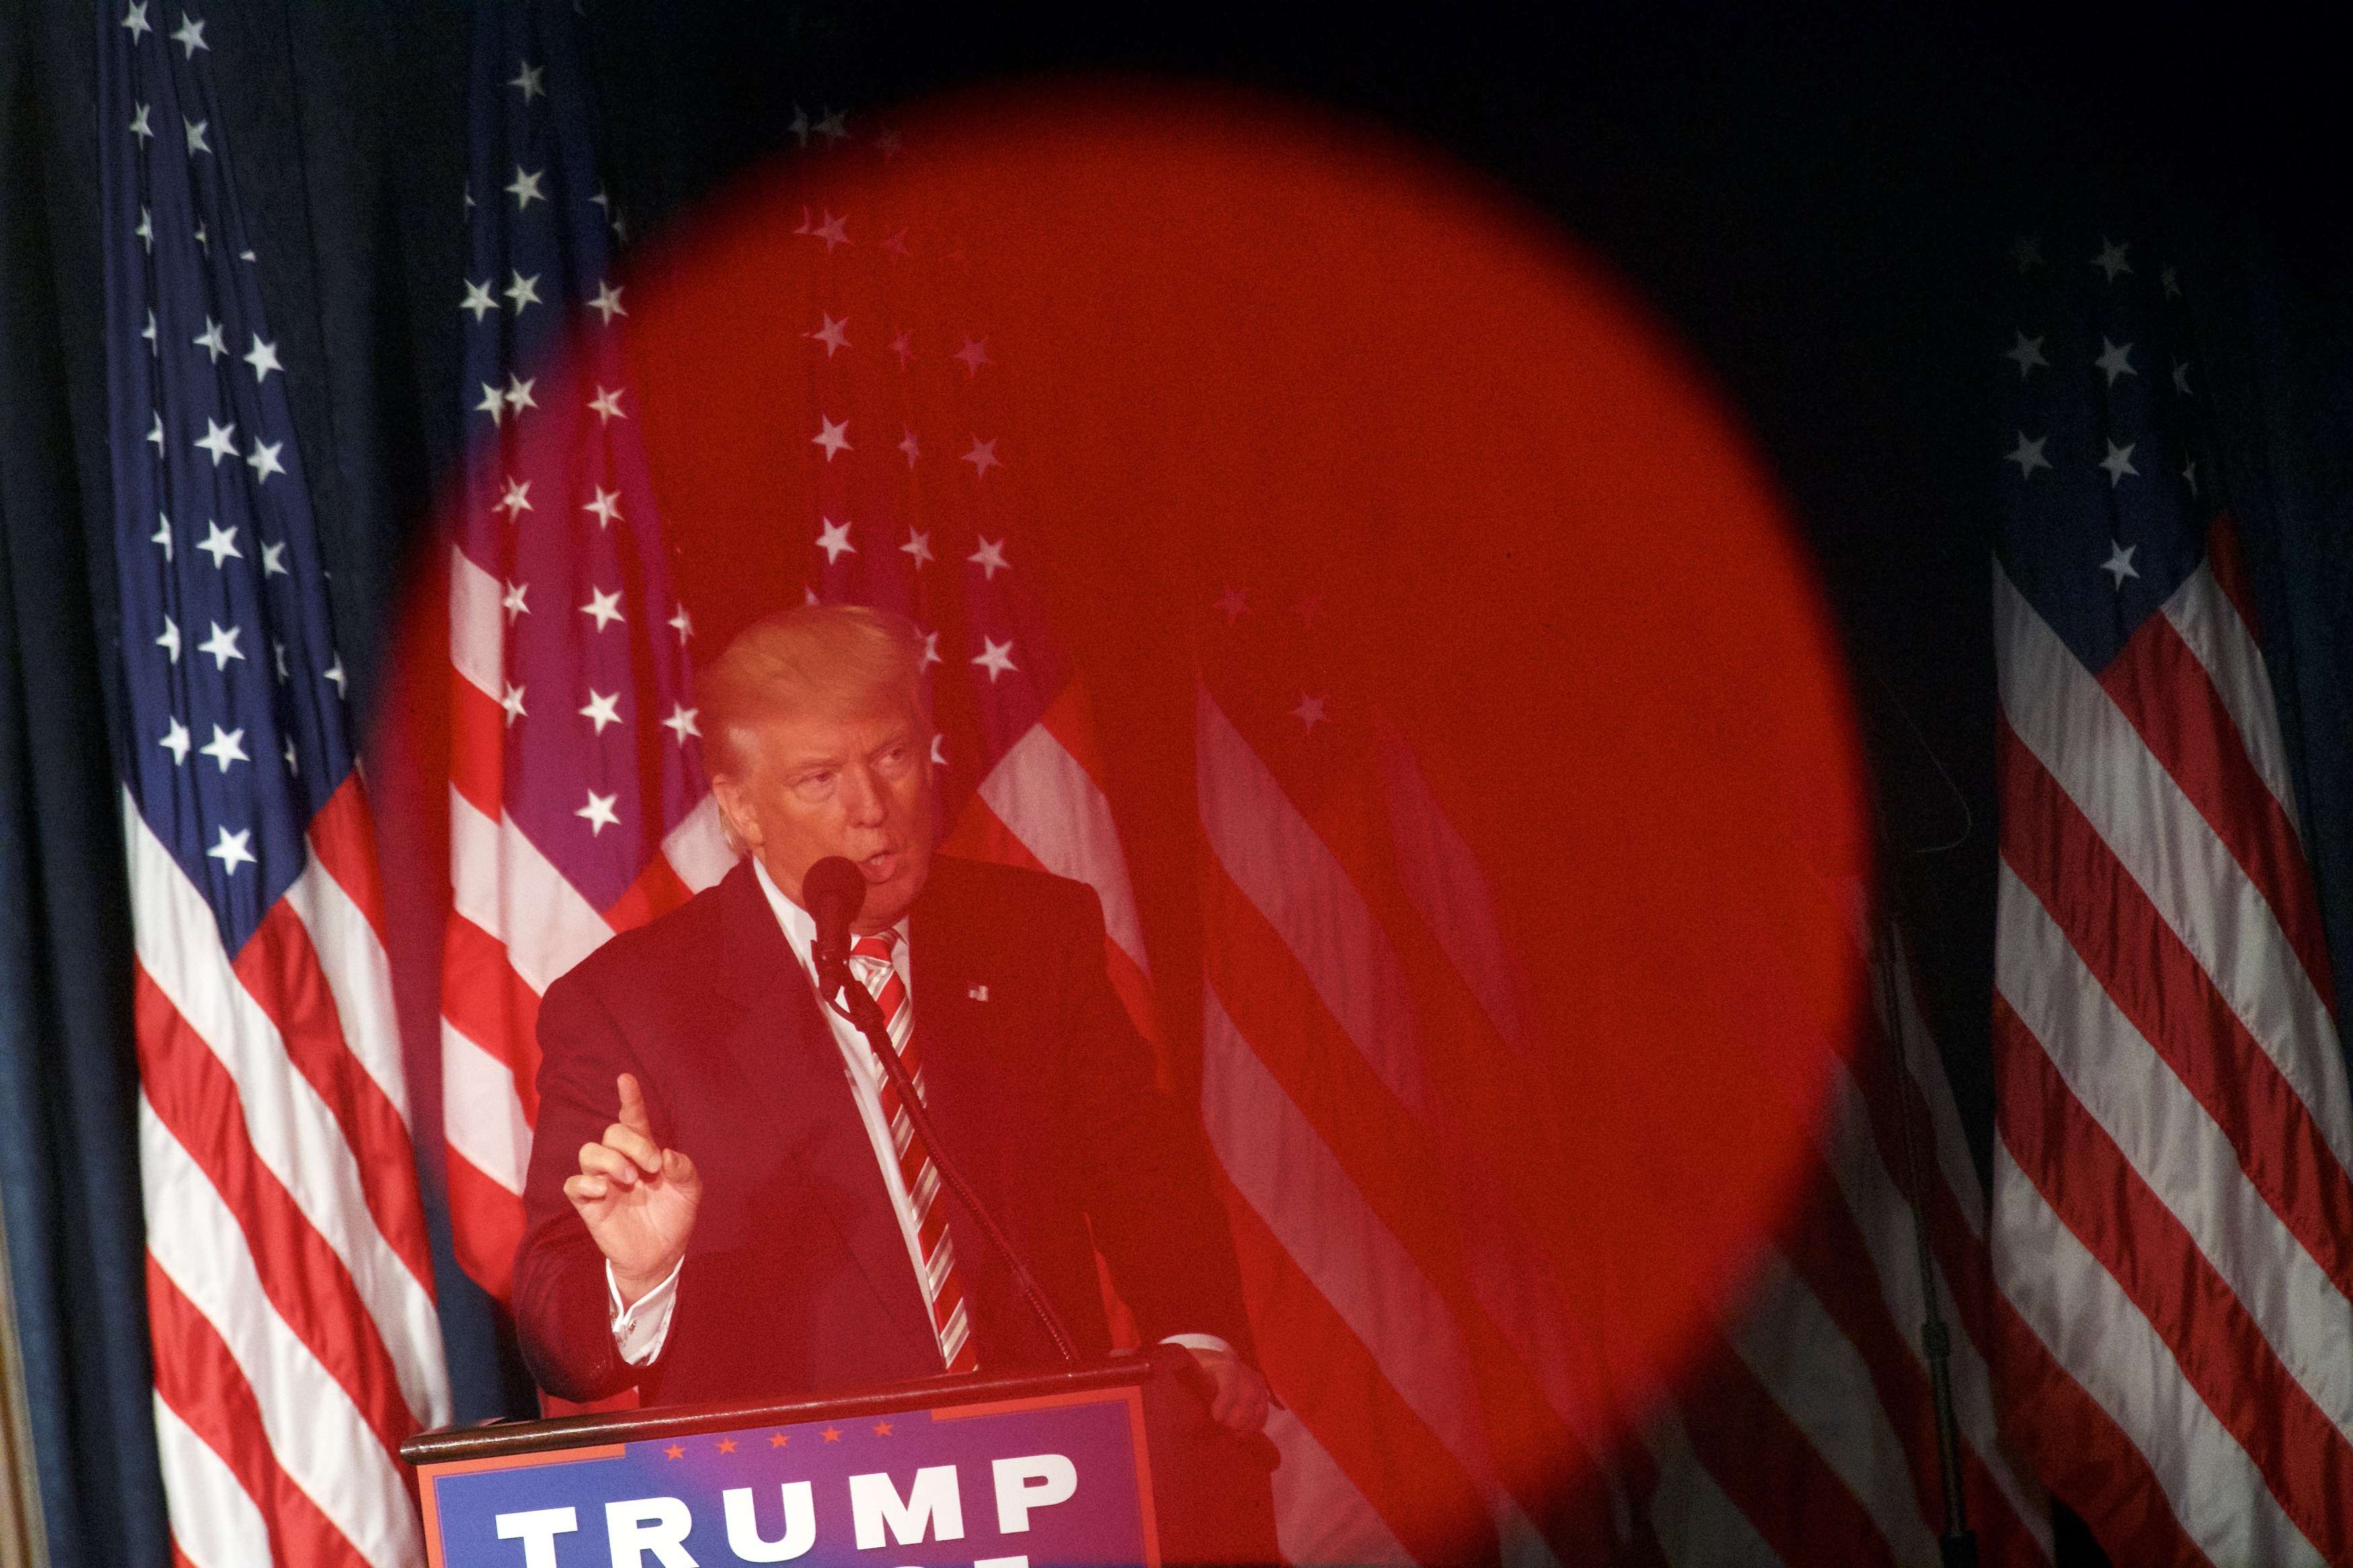 Republican presidential nominee Donald Trump is seen through the red light of a videographer's camera while delivering a speech at The Union League of Philadelphia. Photo: AFP